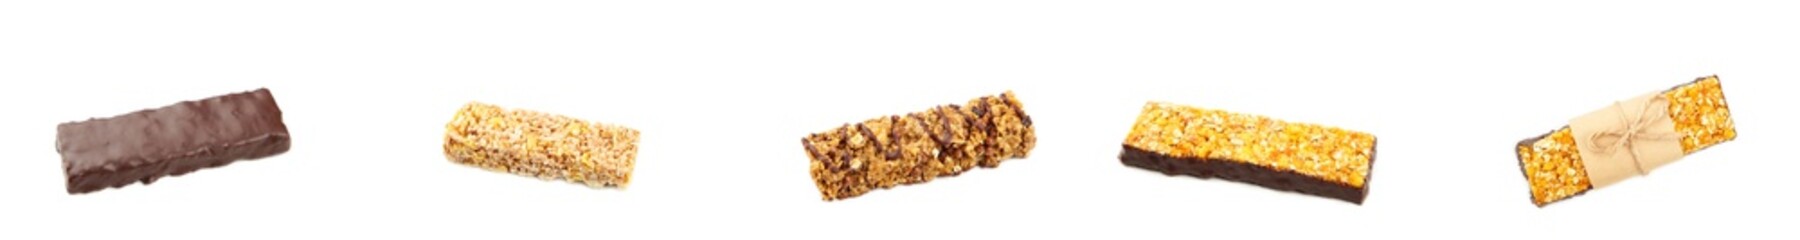 Set of cereal bars with chocolate isolated on white background.